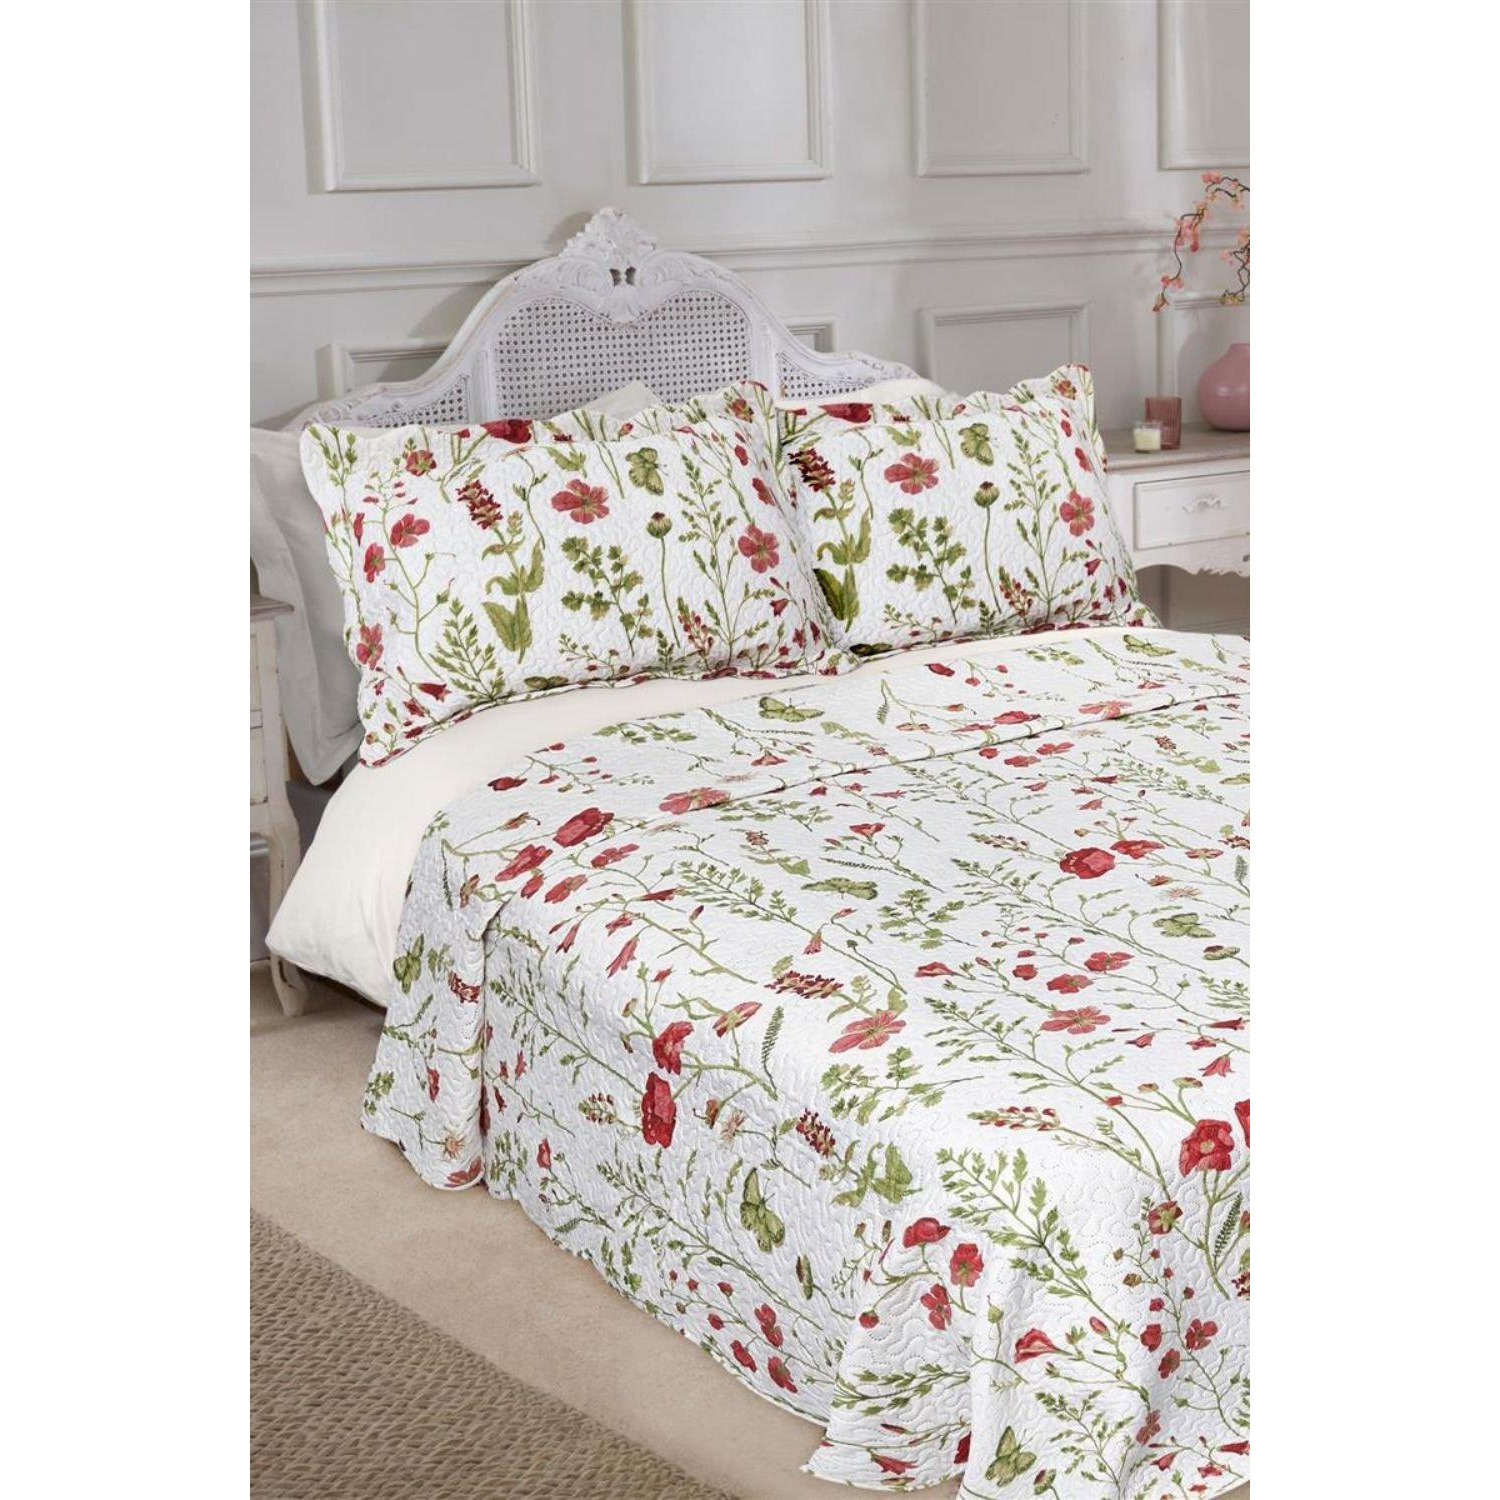 Poppies Meadow Floral Bedspread Bedding Sets - image 1